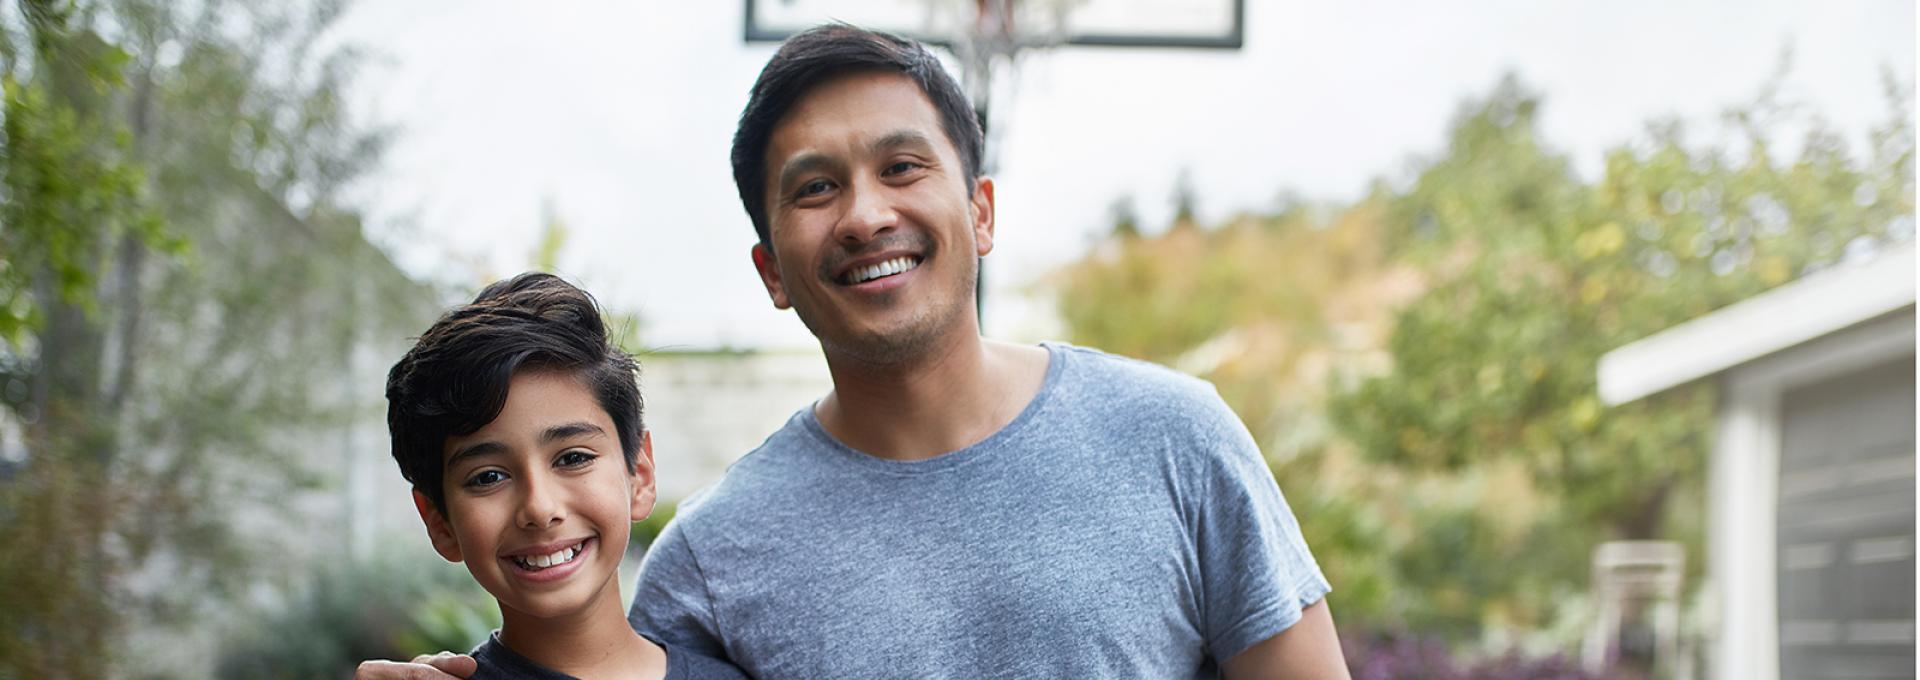 Father and son posing for a photo. The boy is holding a basketball.